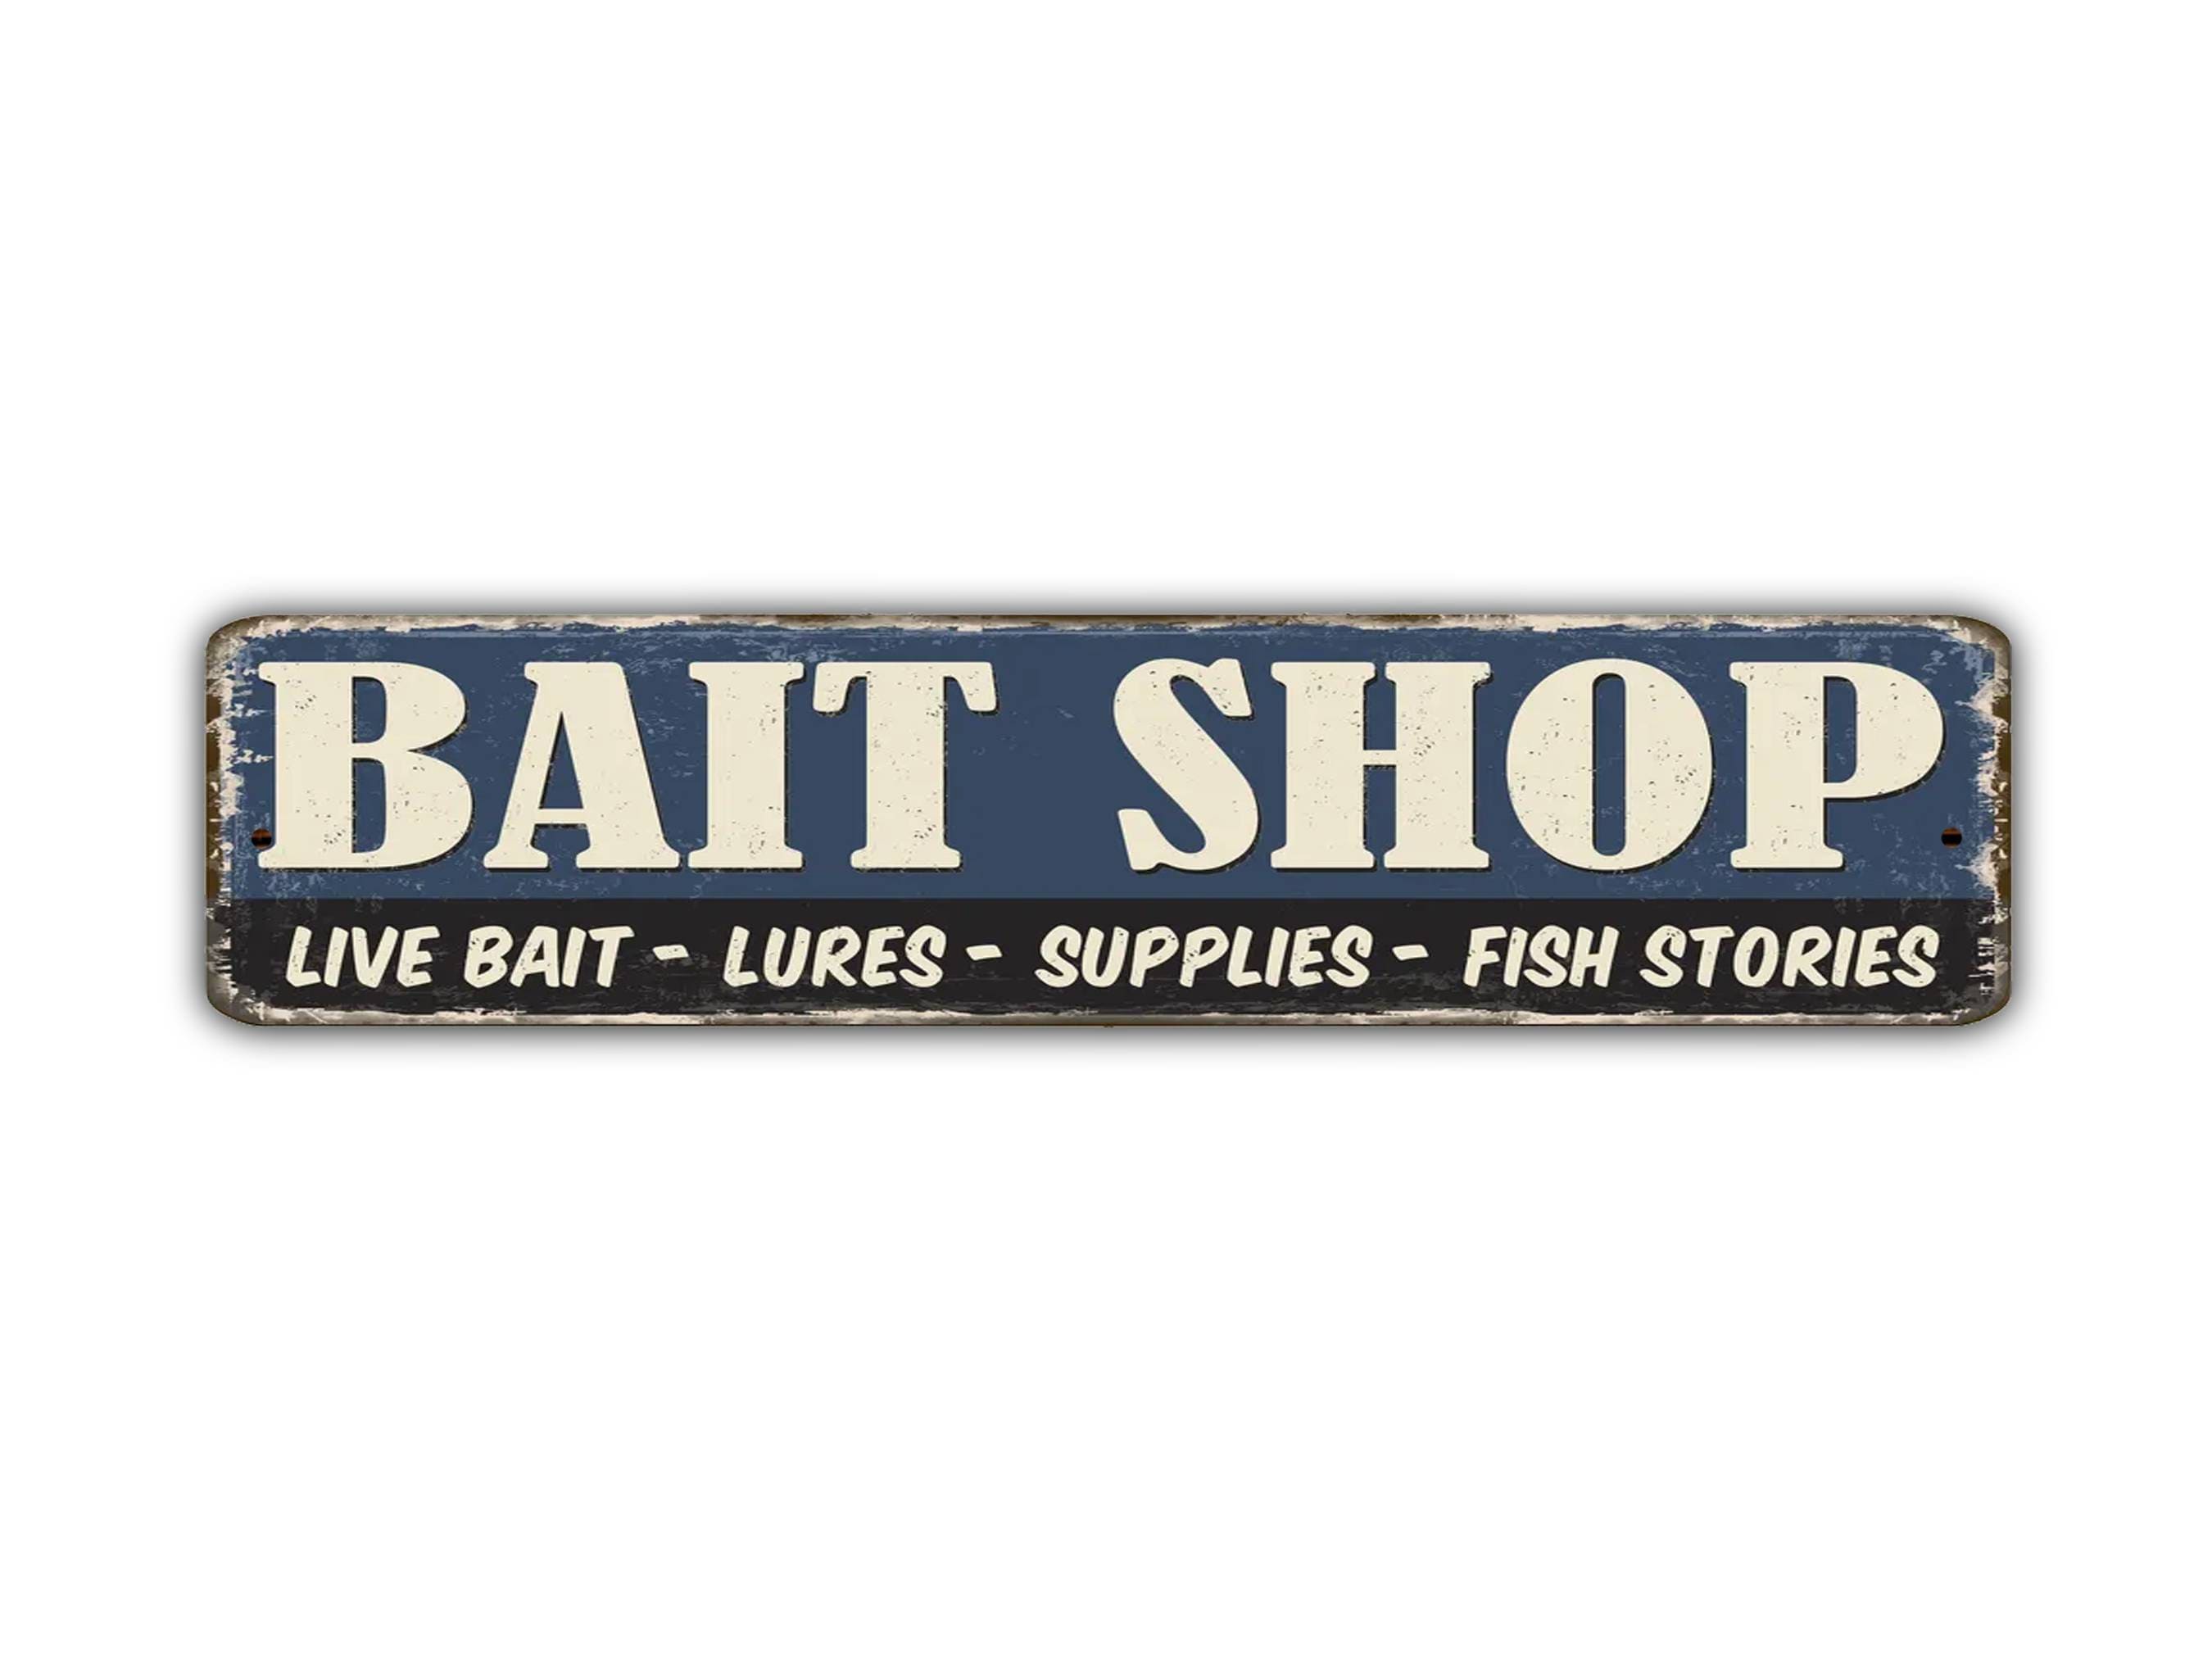 Clear Lake Bait & Tackle Inc. was live.